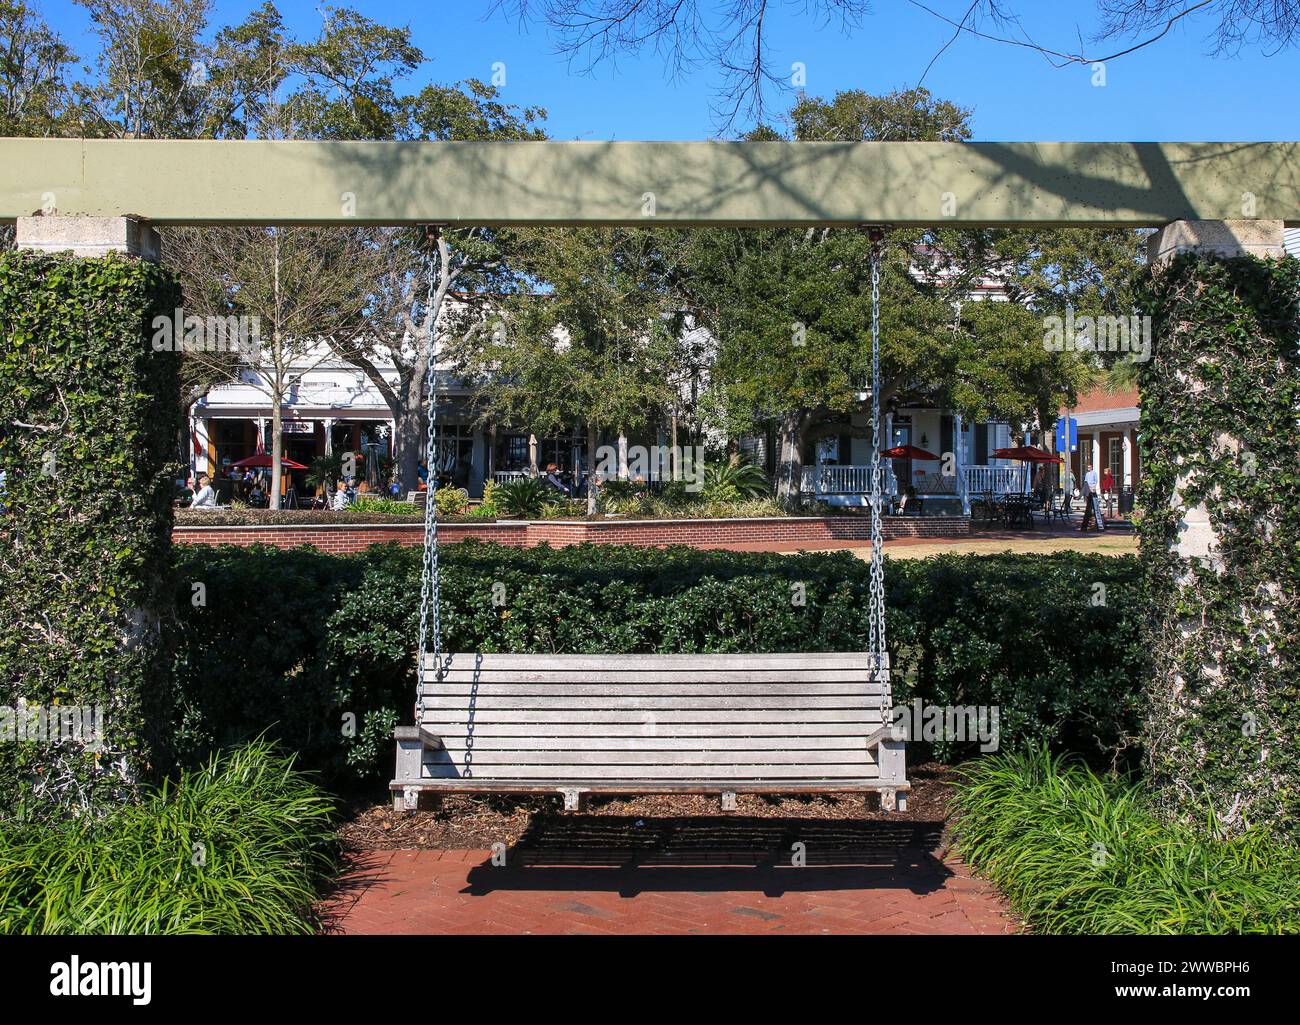 Wood bench swing hanging in Henry Champbers Park with shops in the background in Beaufort South Carolina Stock Photo